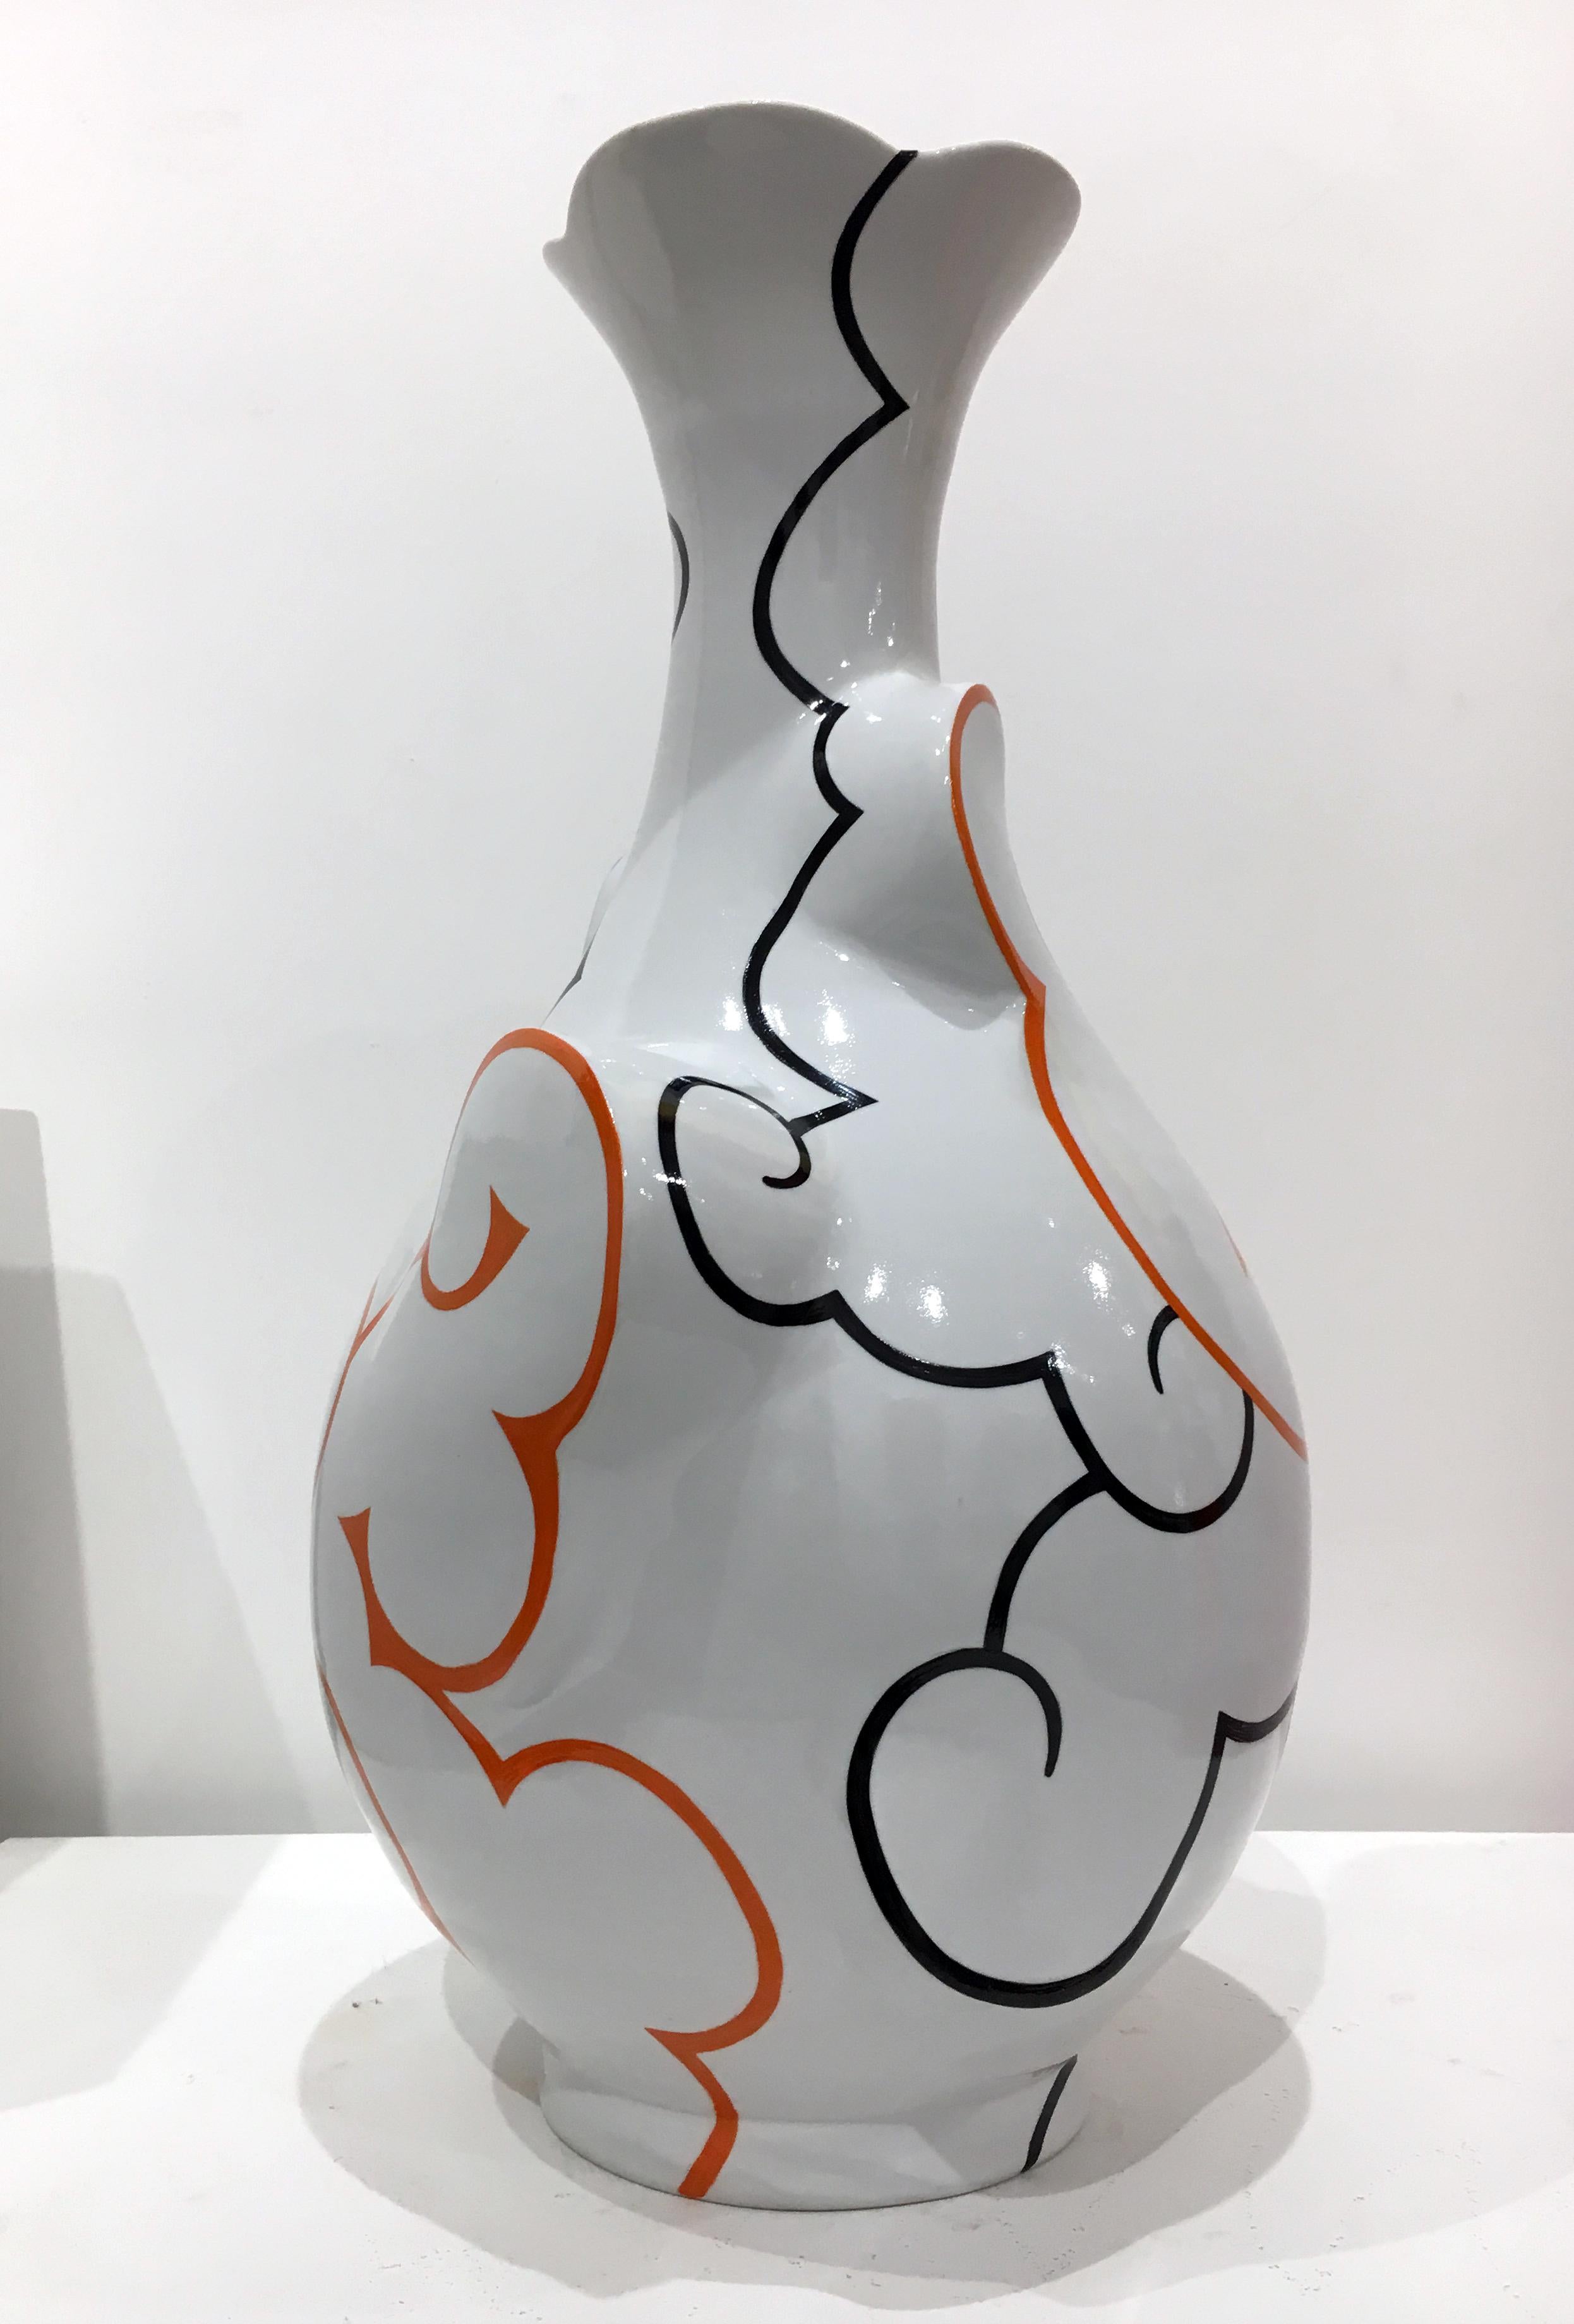 Flared Cloud Pear Bottle, Contemporary Ceramic Sculpture, Porcelain, China Paint - Gray Abstract Sculpture by Sam Chung